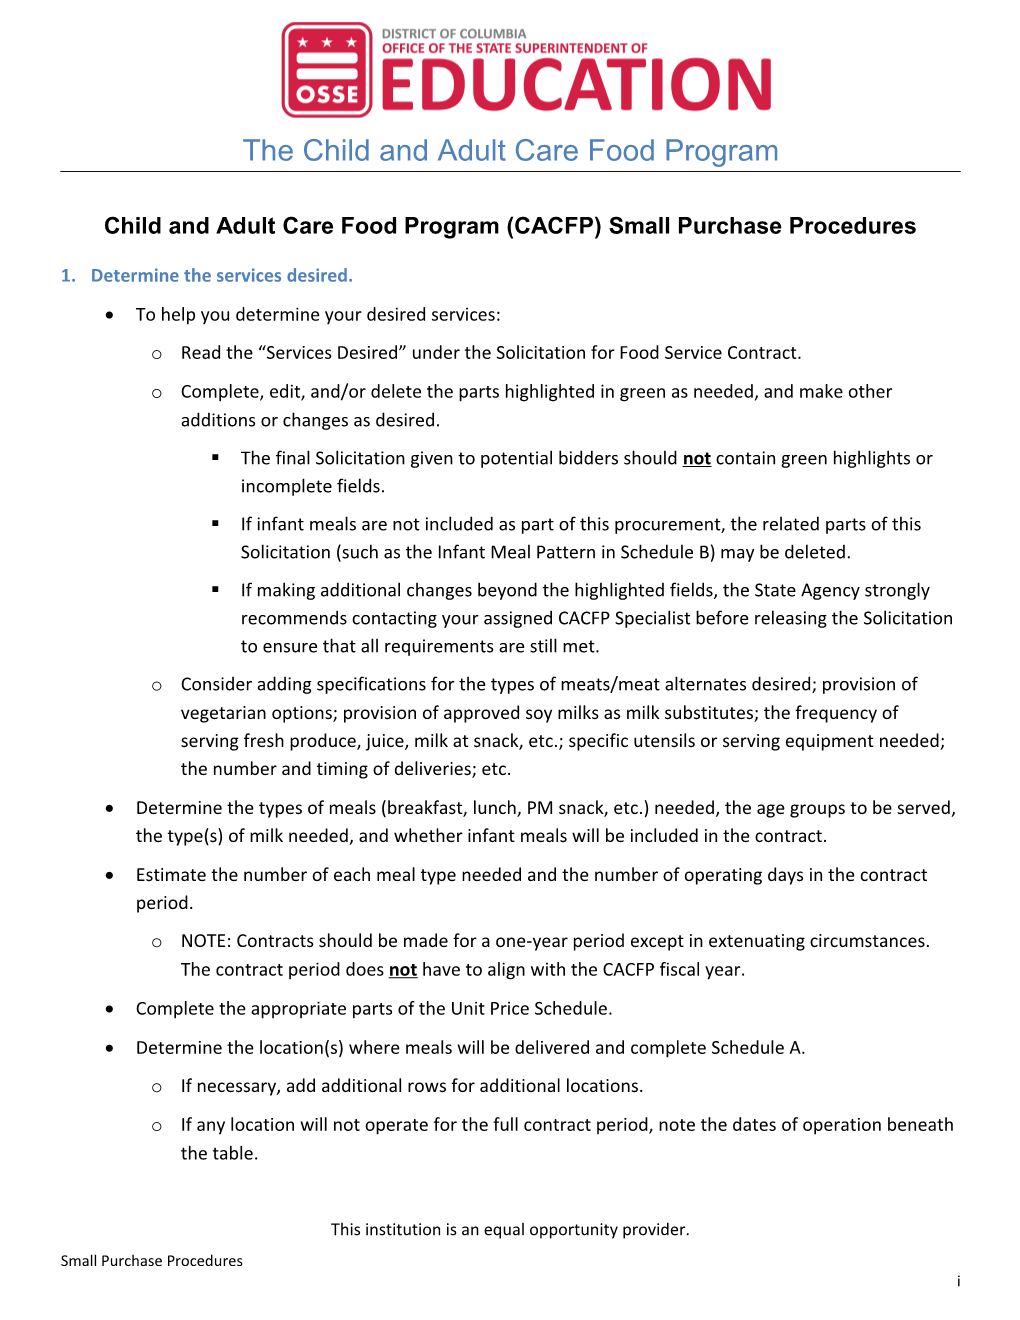 Child and Adult Care Food Program (CACFP) Small Purchase Procedures